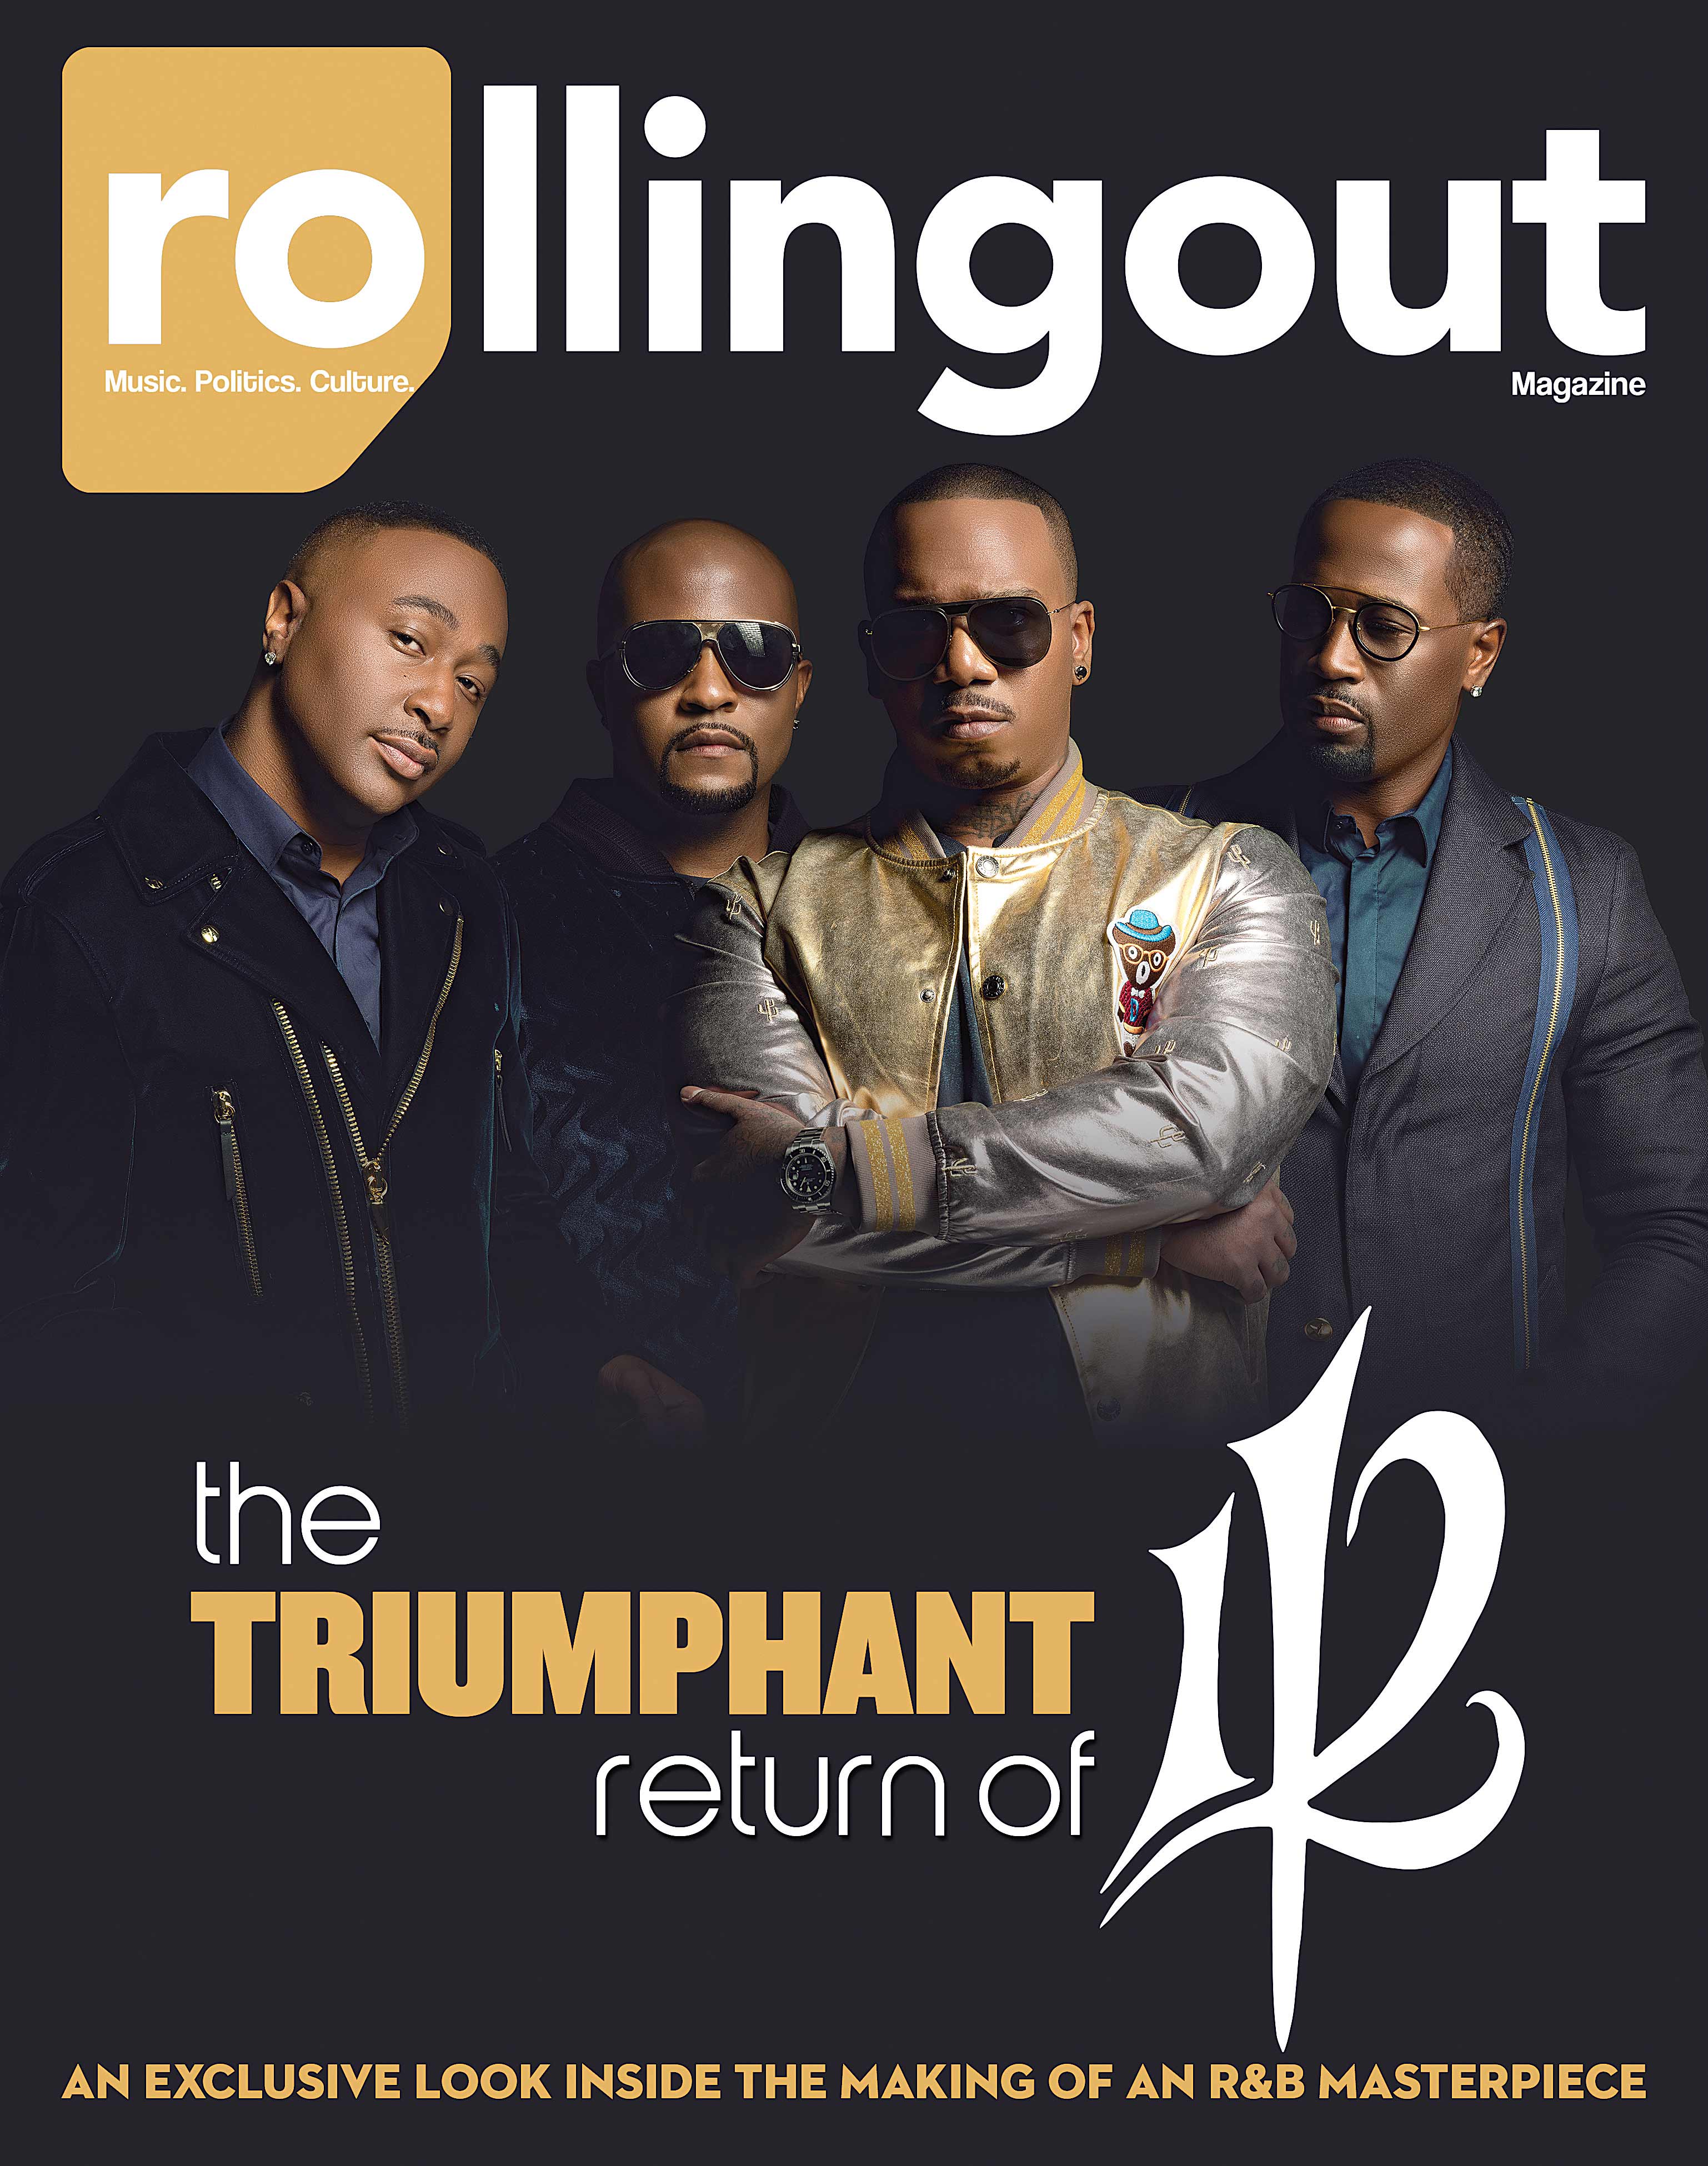 The triumphant return of 112: Exclusive look at an R&B masterpiece